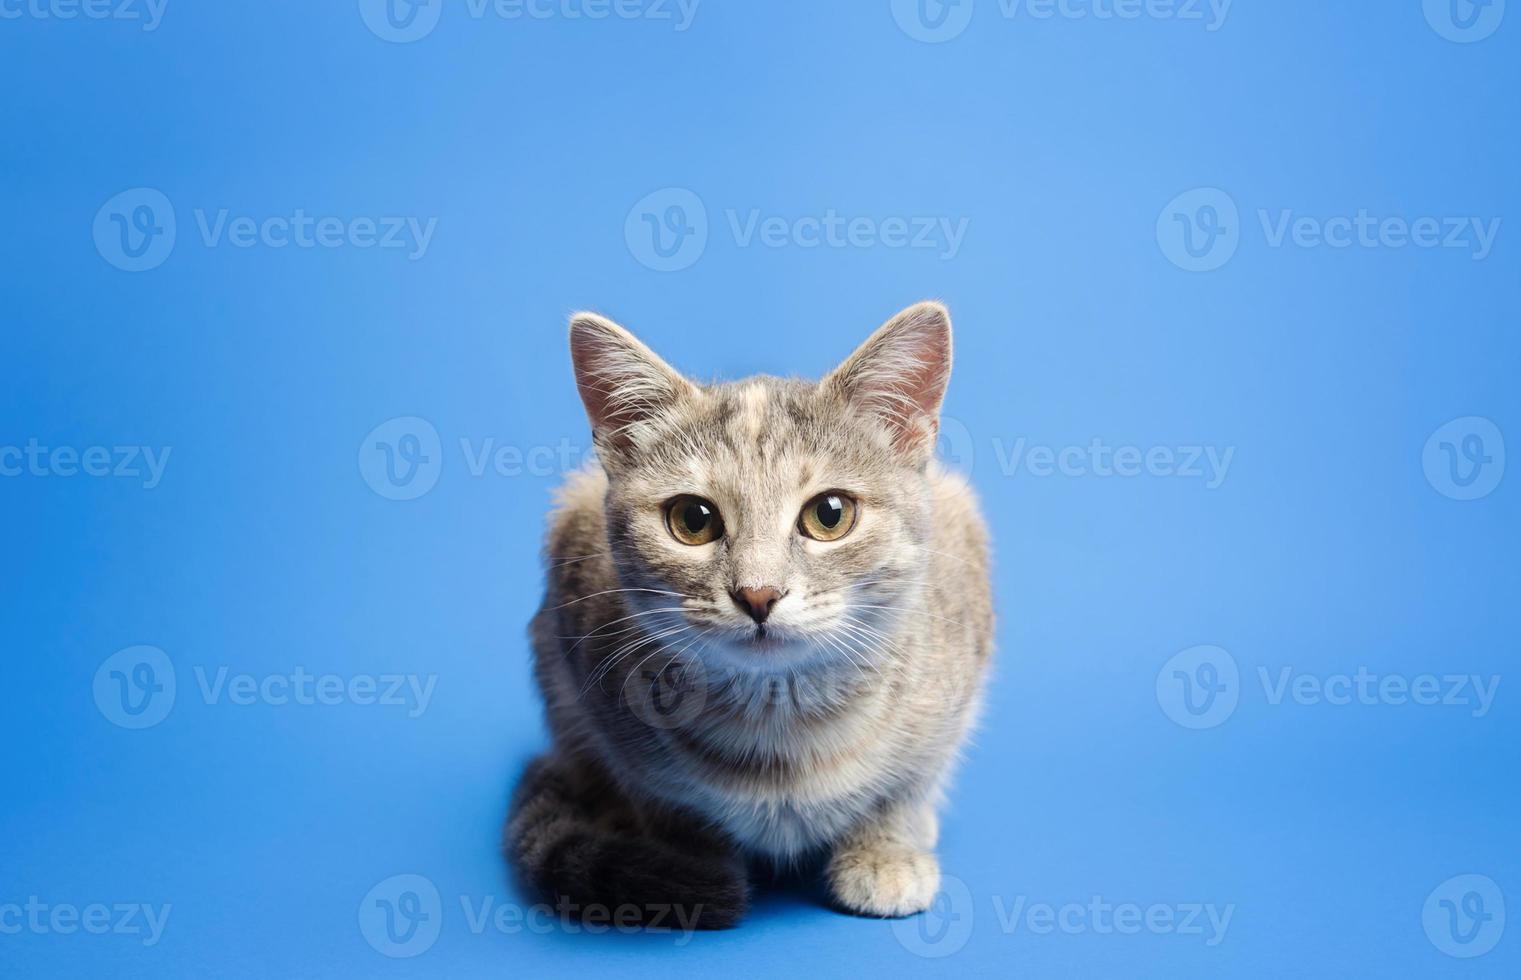 Cute tabby cat is looking curiously at the camera on a blue background. Beautiful funny kitten. Breaking the fourth wall. Curiosity and attentiveness, playful kitty. Portrait, sitting posing. photo